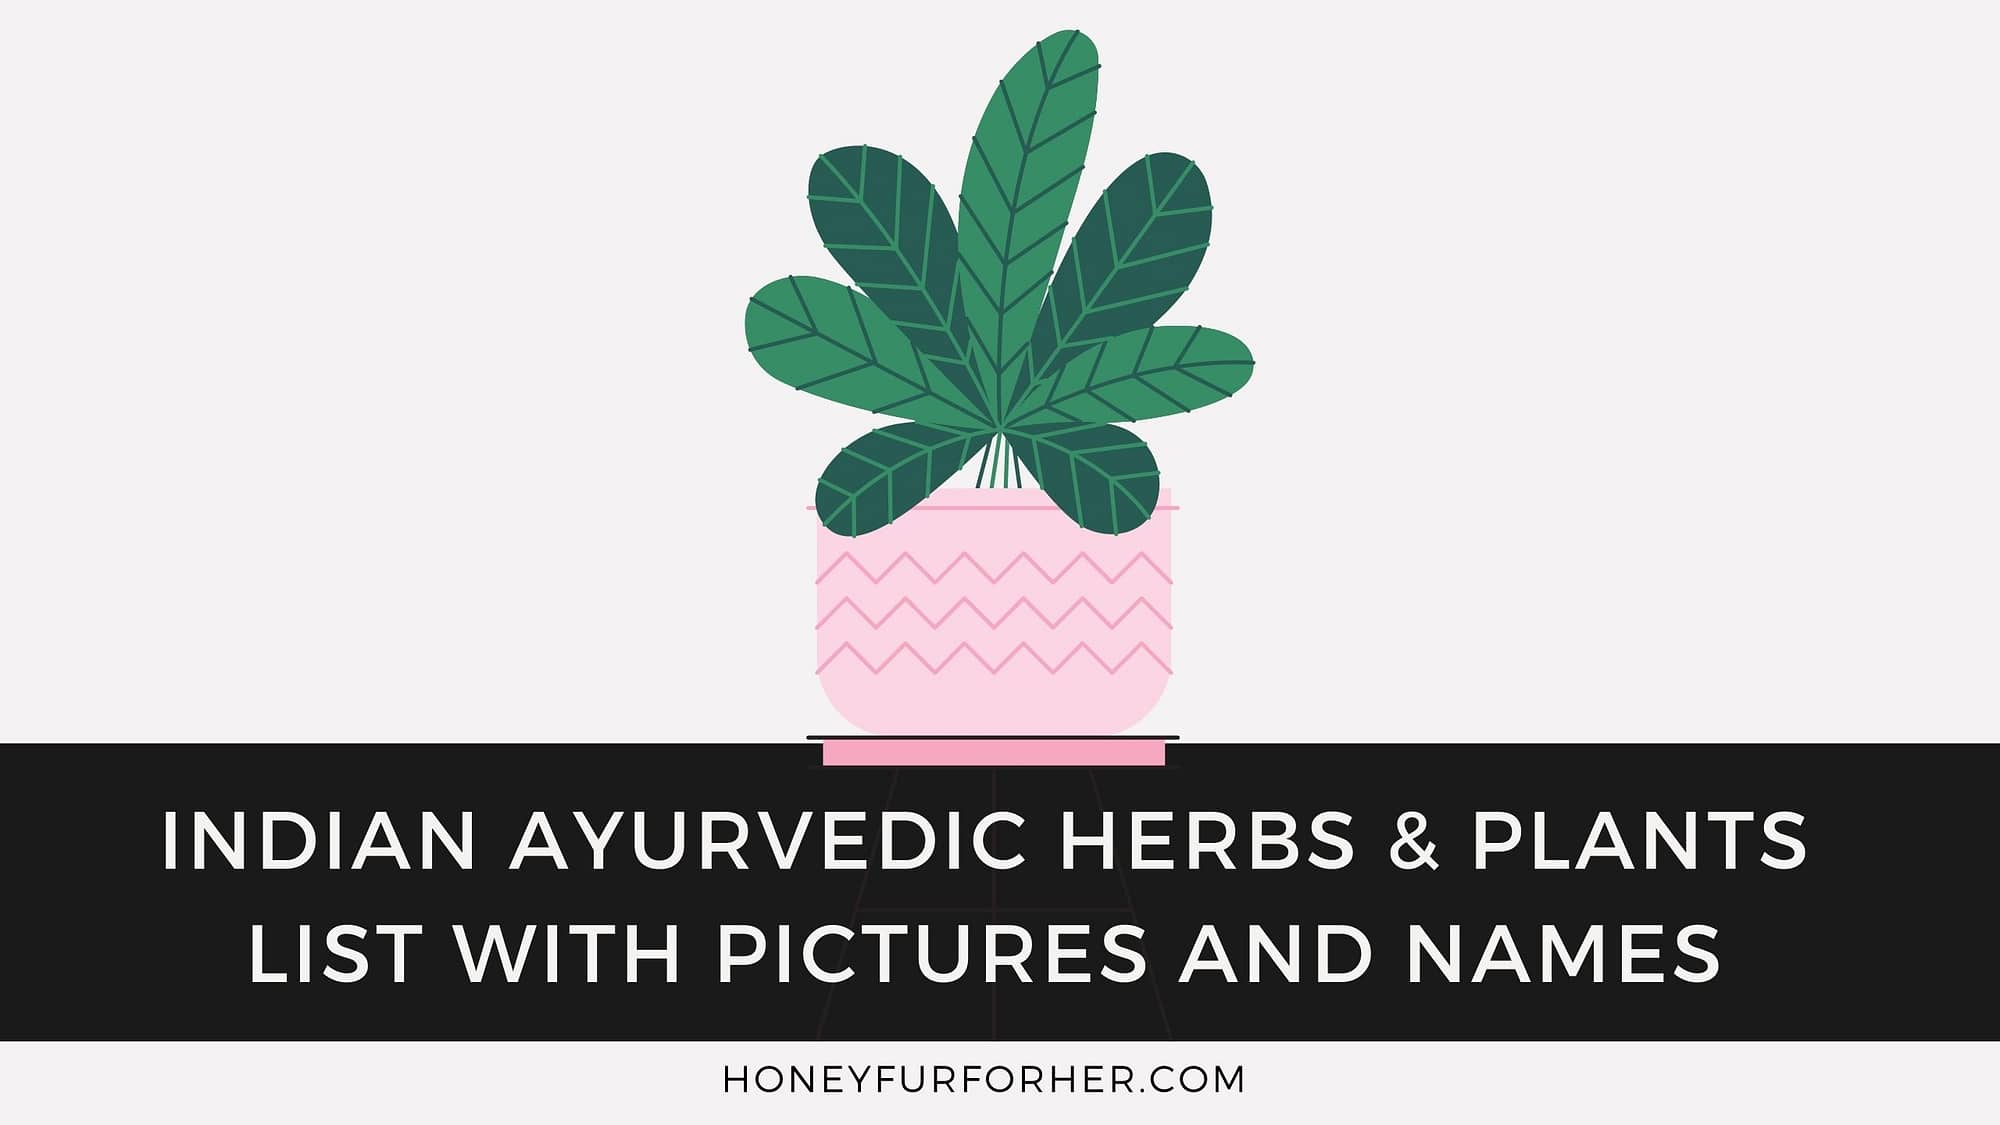 Indian Ayurvedic Herbs & Plants List With Pictures And Names Feature Image